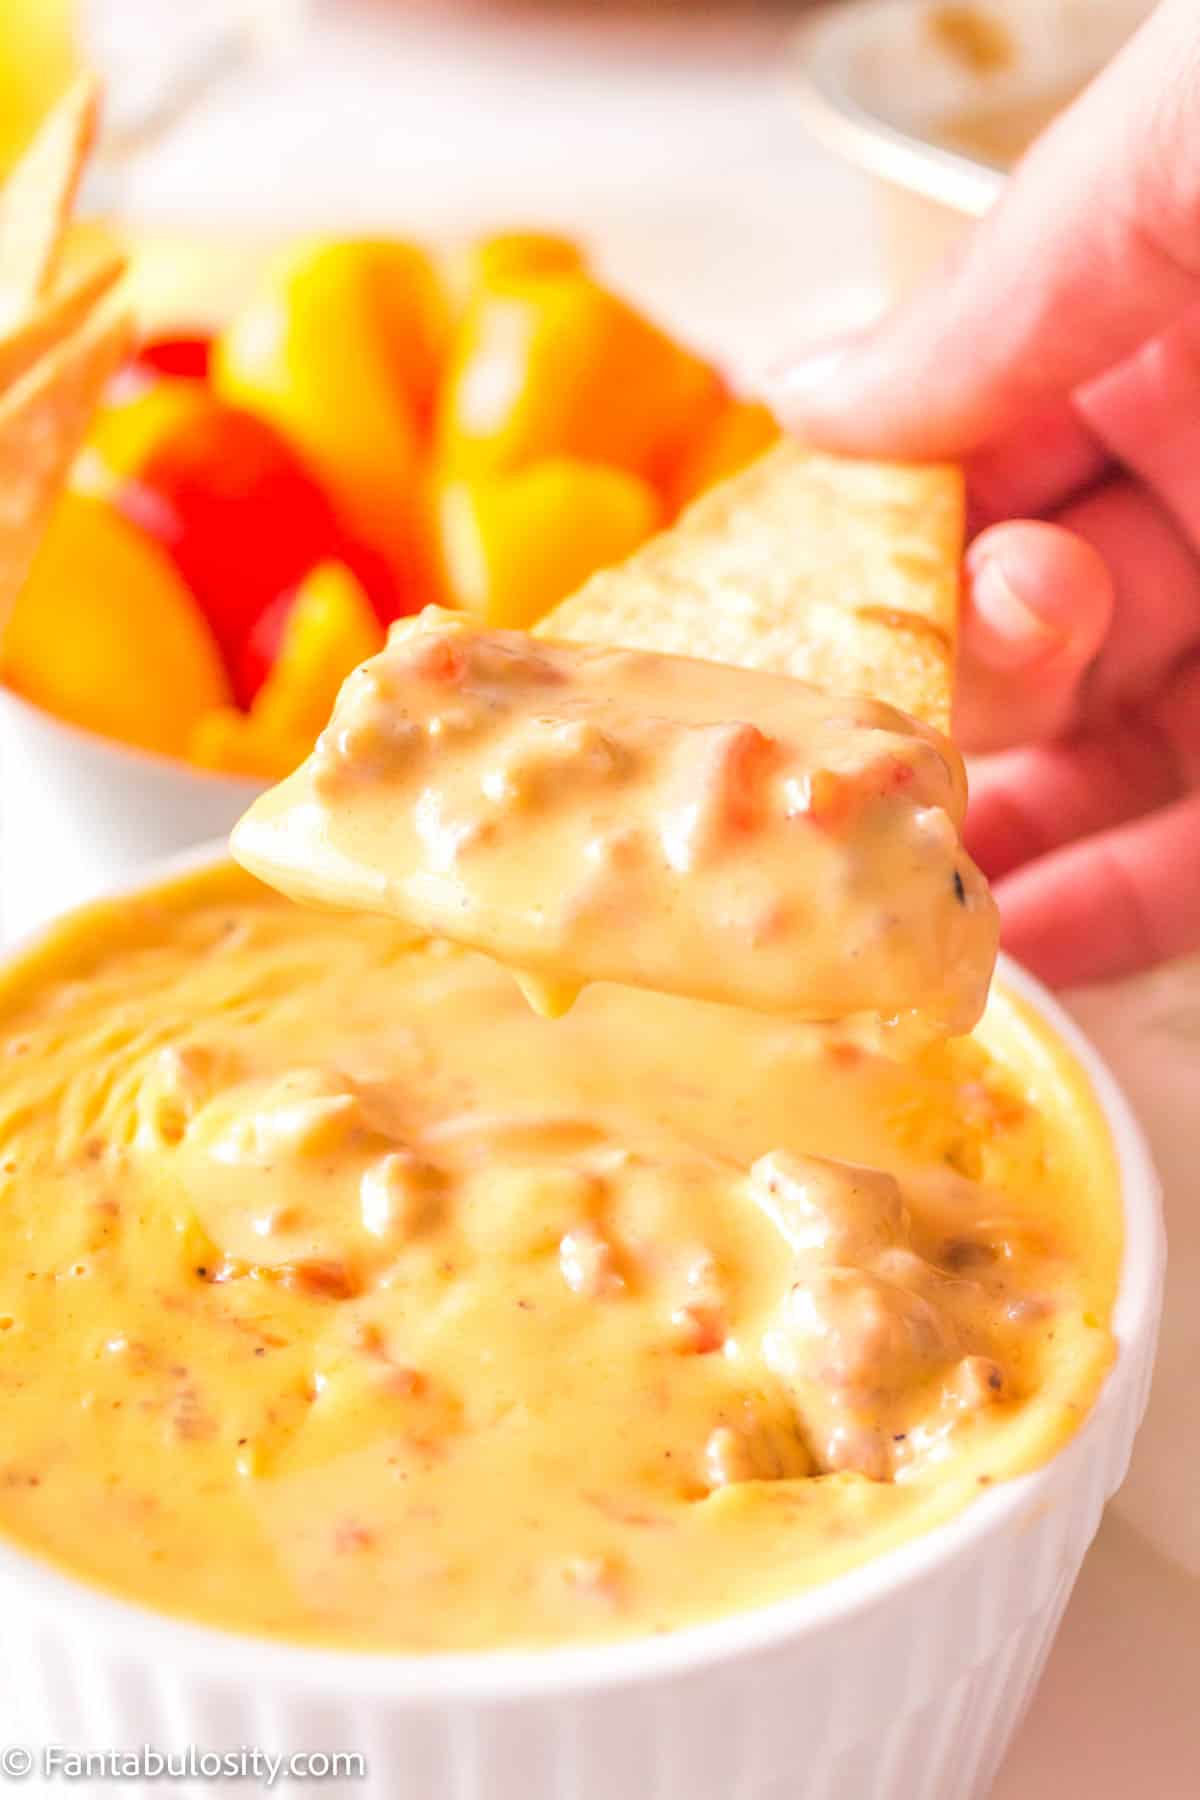 A pita chip being dipped in the smoked queso dip.